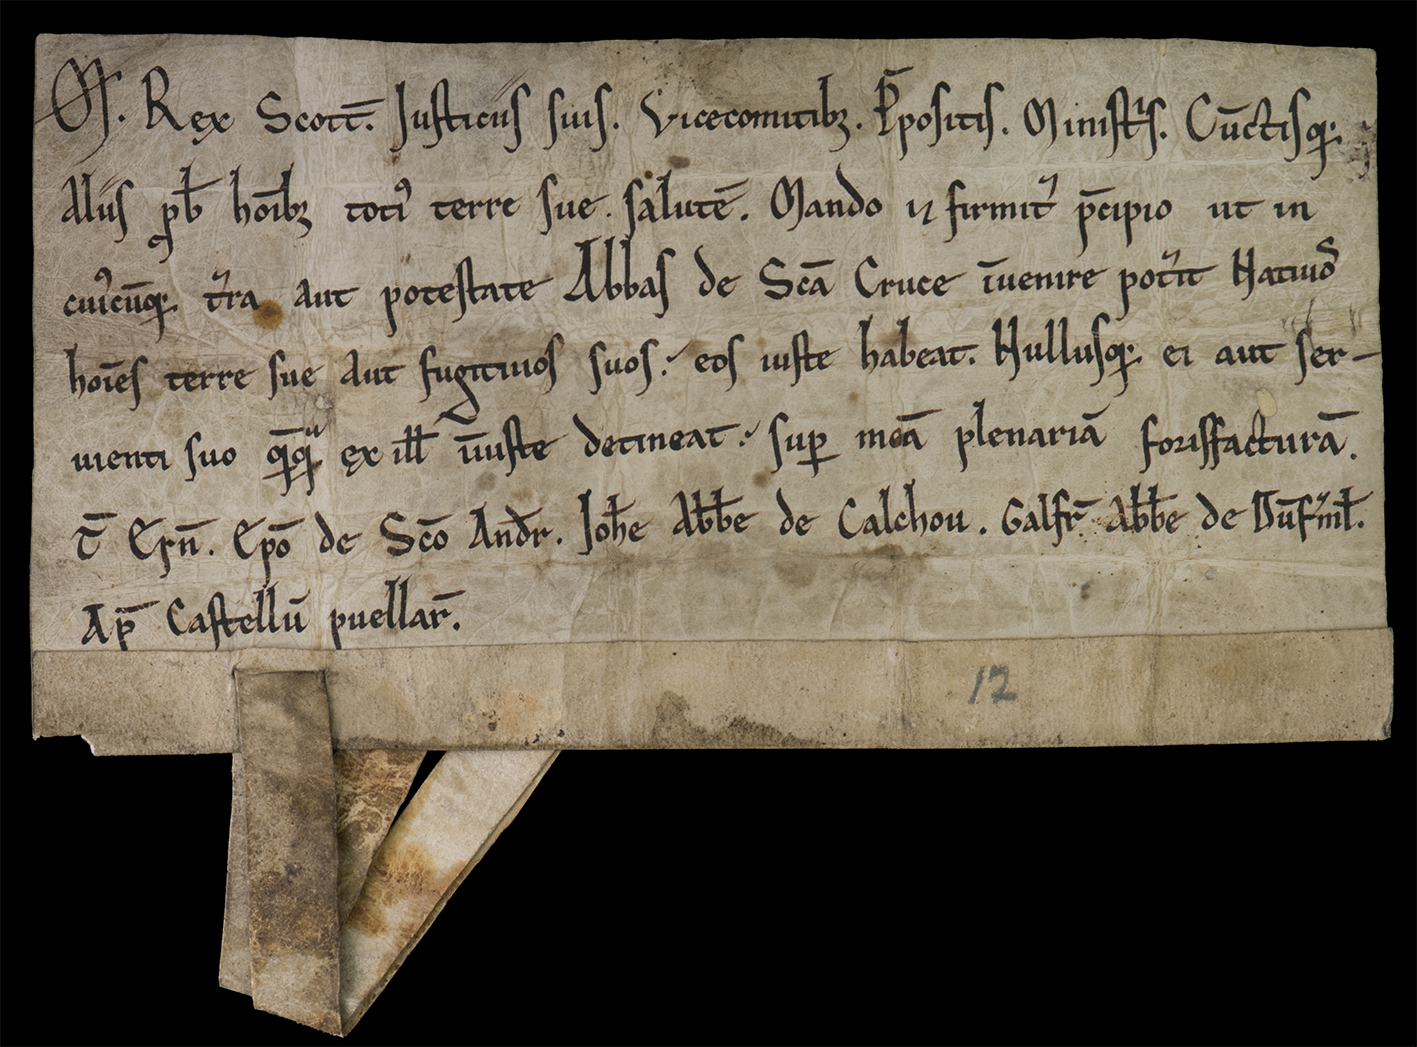 Charter by King Maclcolm IV, National Records of Scotland (GD45/13/224)